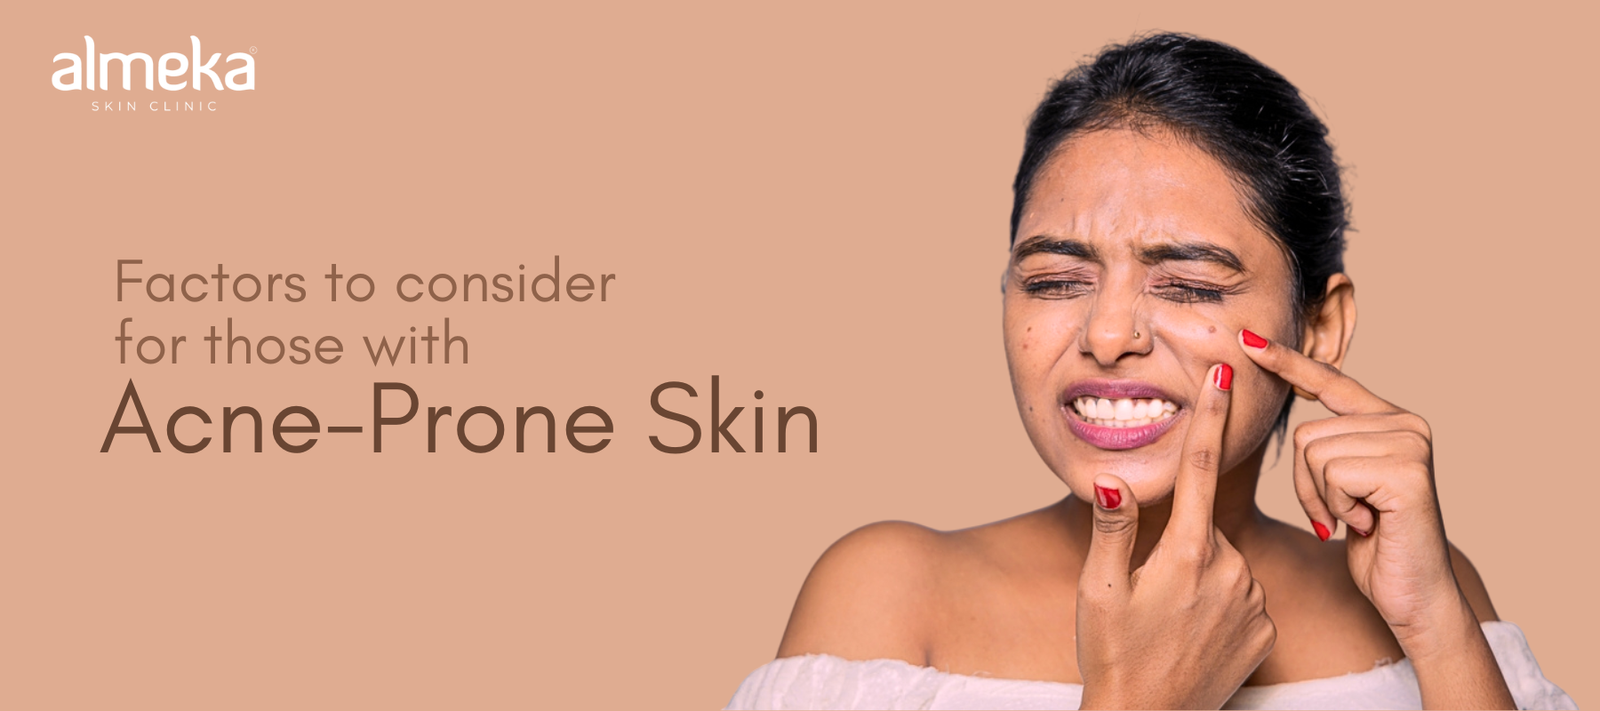 Combating Dry Skin and Acne with Specialized Solutions